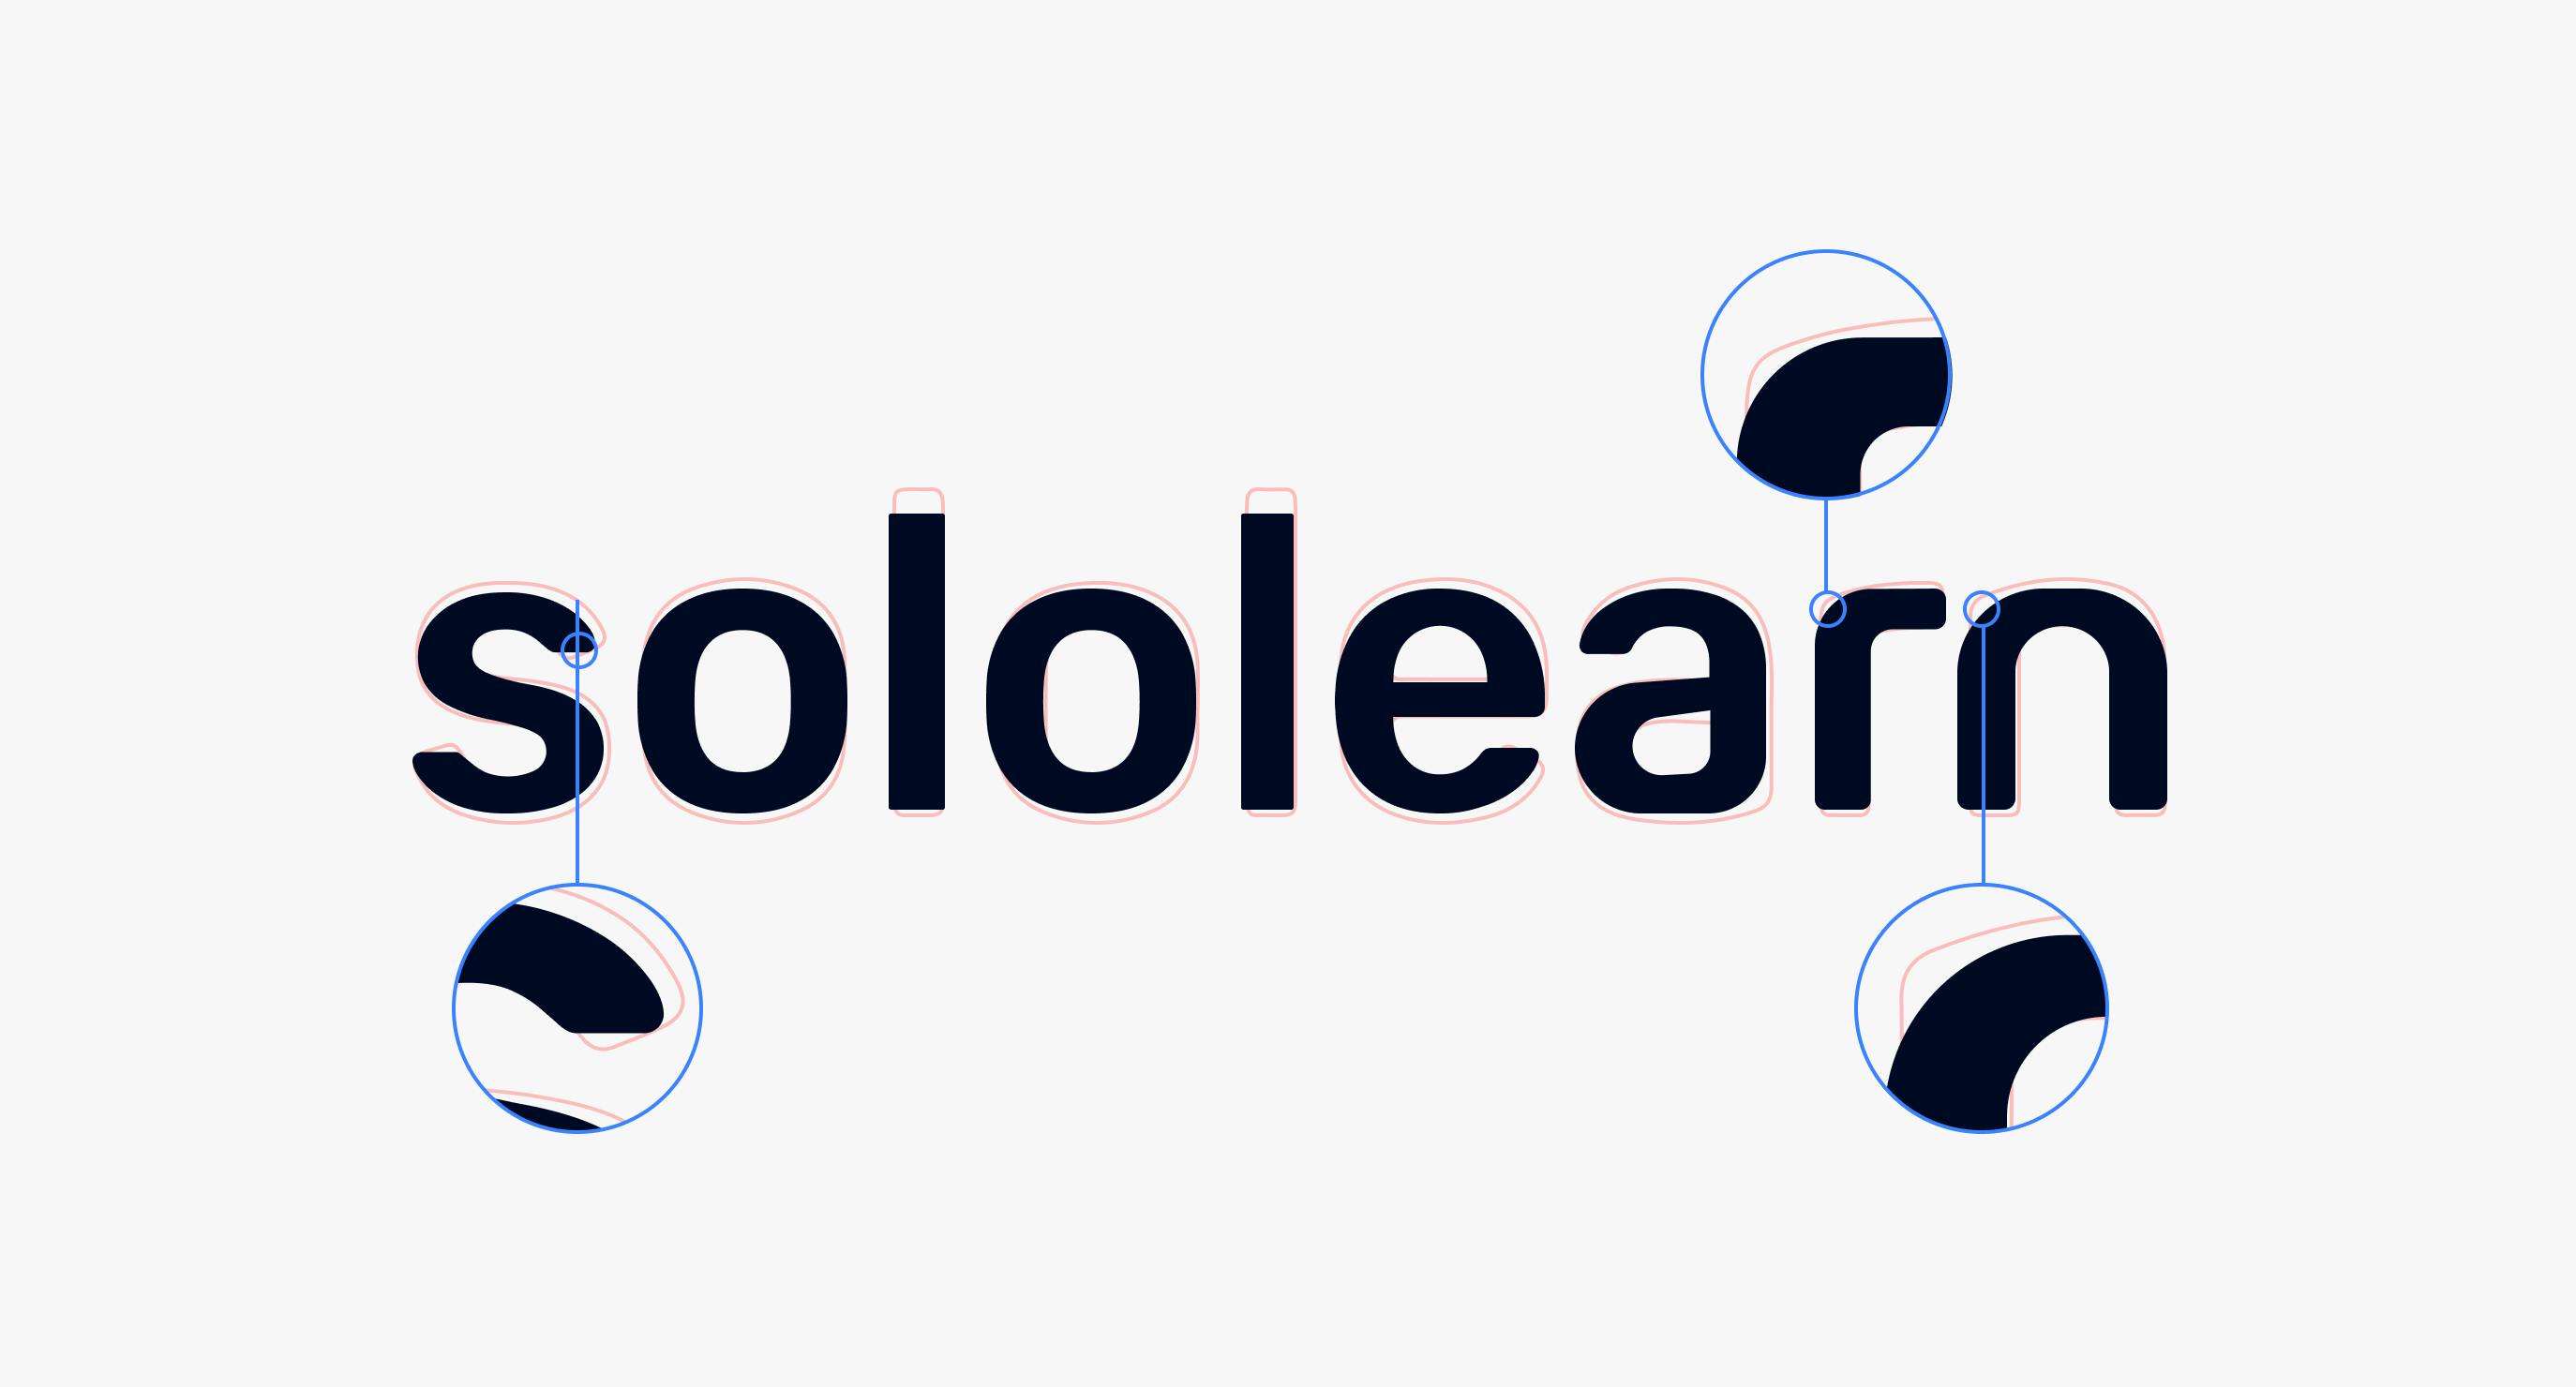 A closer look at Sololearn’s wordmark